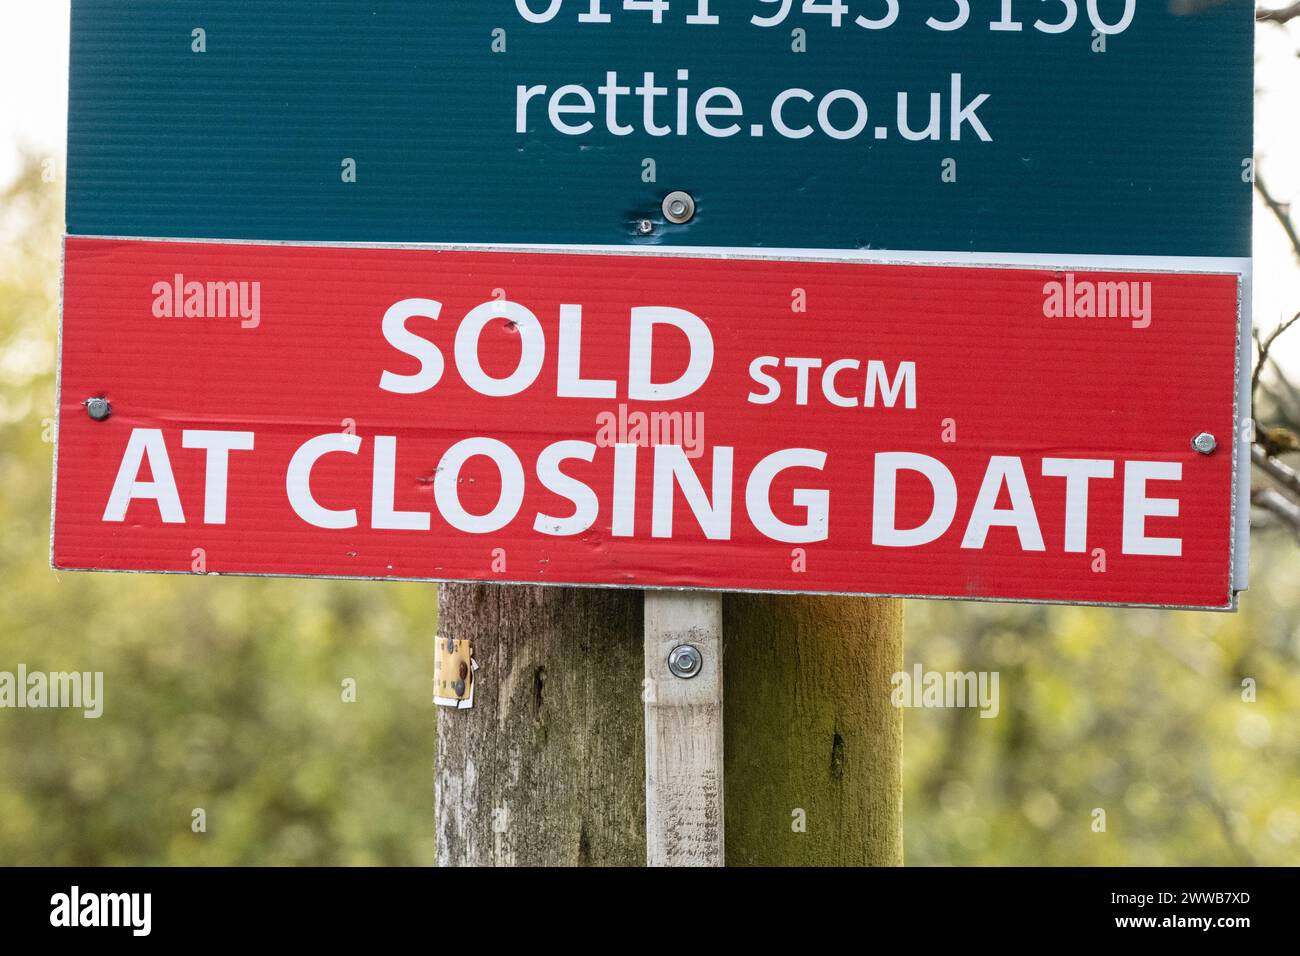 Sold subject to concluded missives (STCM) at closing date sign outside residential property in Scotland - Scottish system for buying property Stock Photo